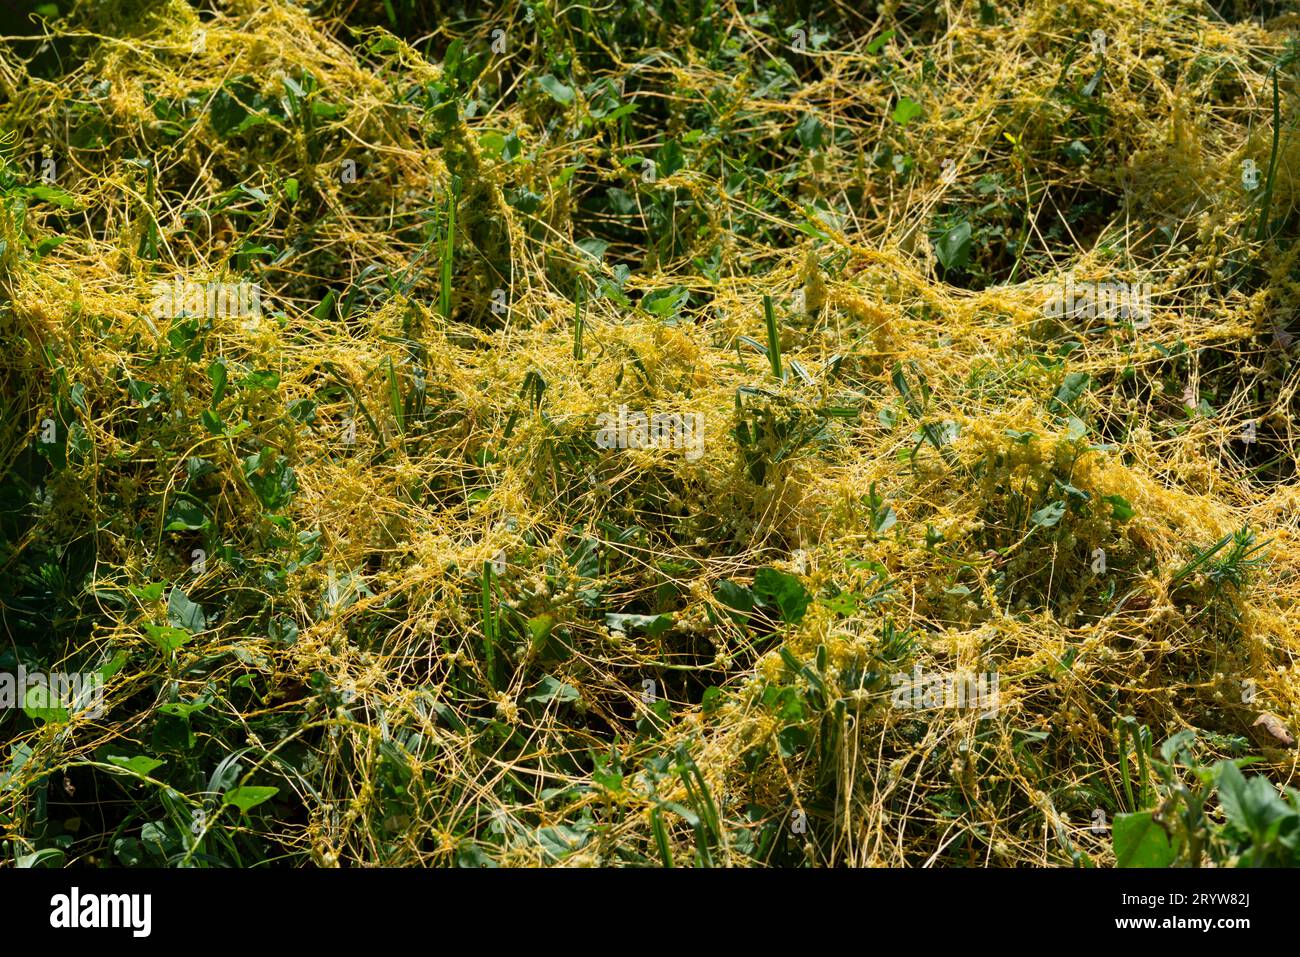 Italy, Lombardy, Field Dodder, Cuscuta Campestris Stock Photo